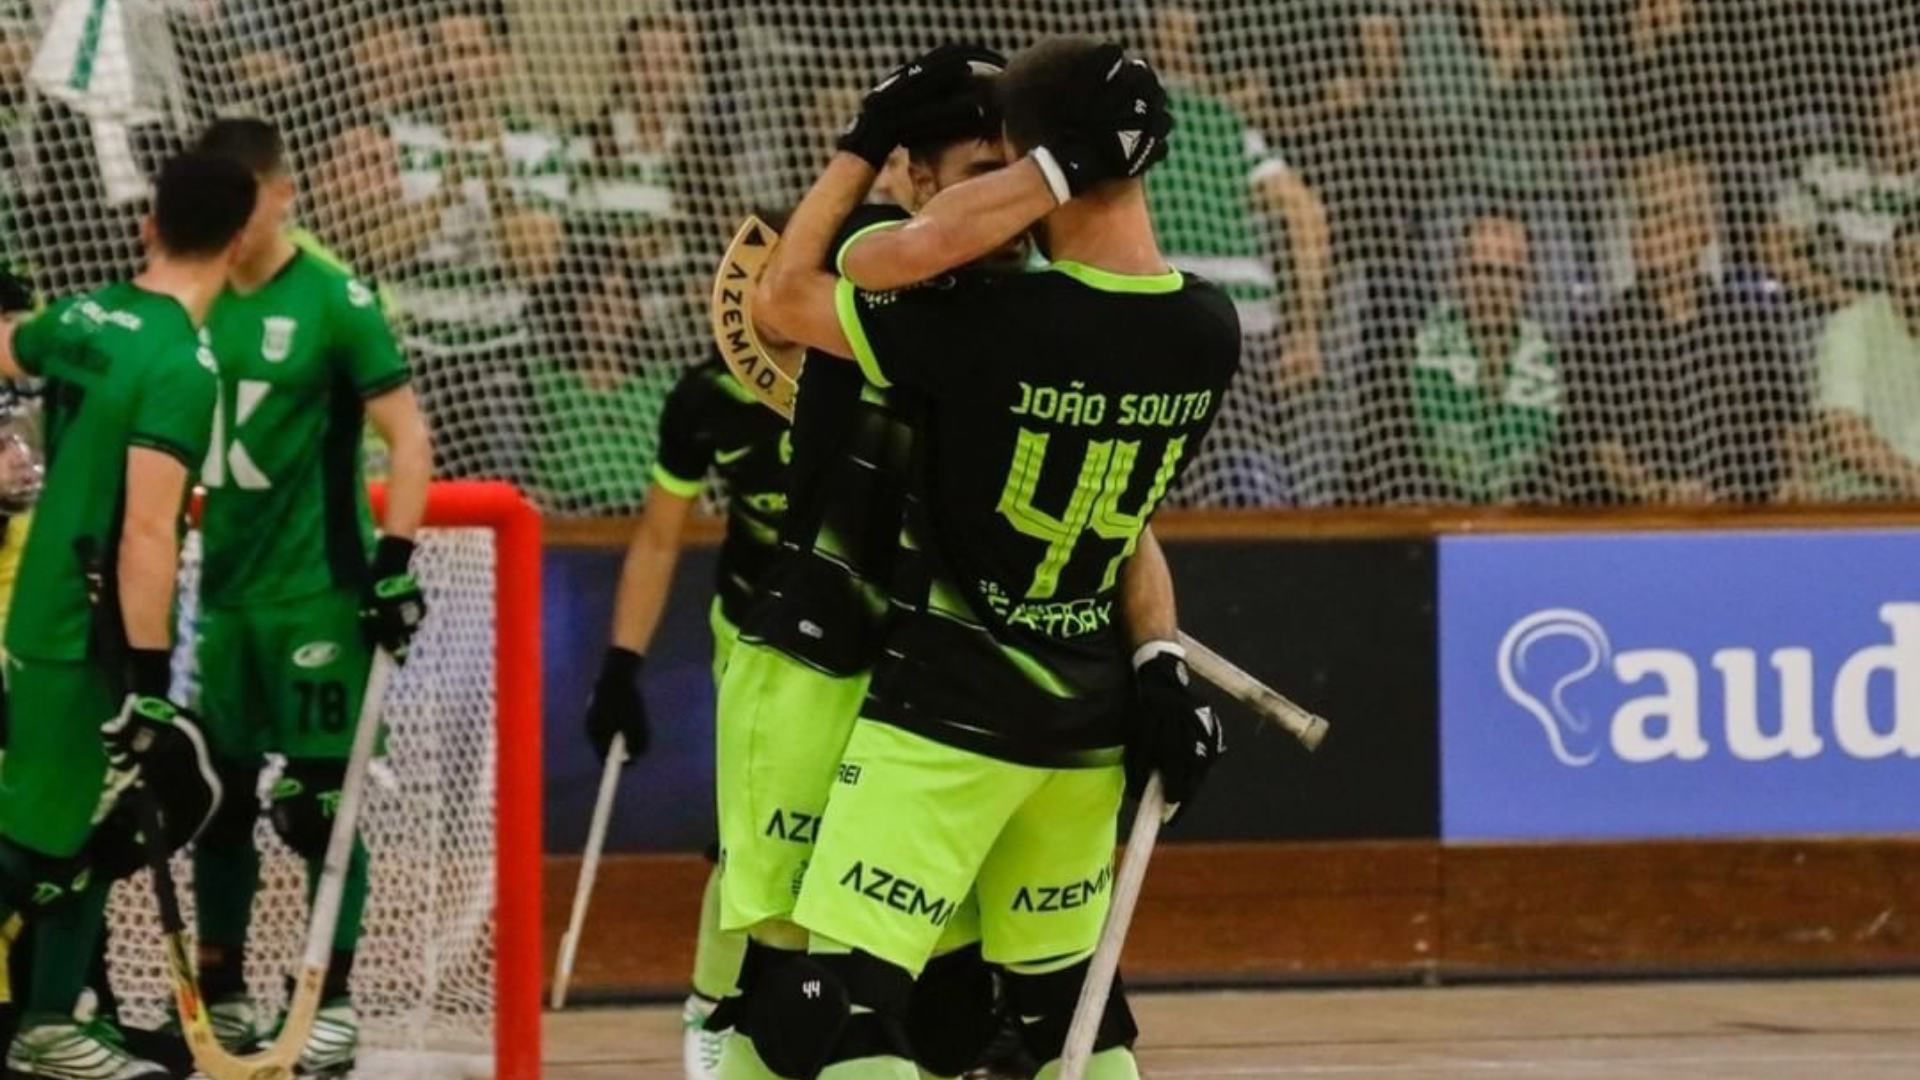 2023 WSE Rink Hockey Champions League Final-Eight